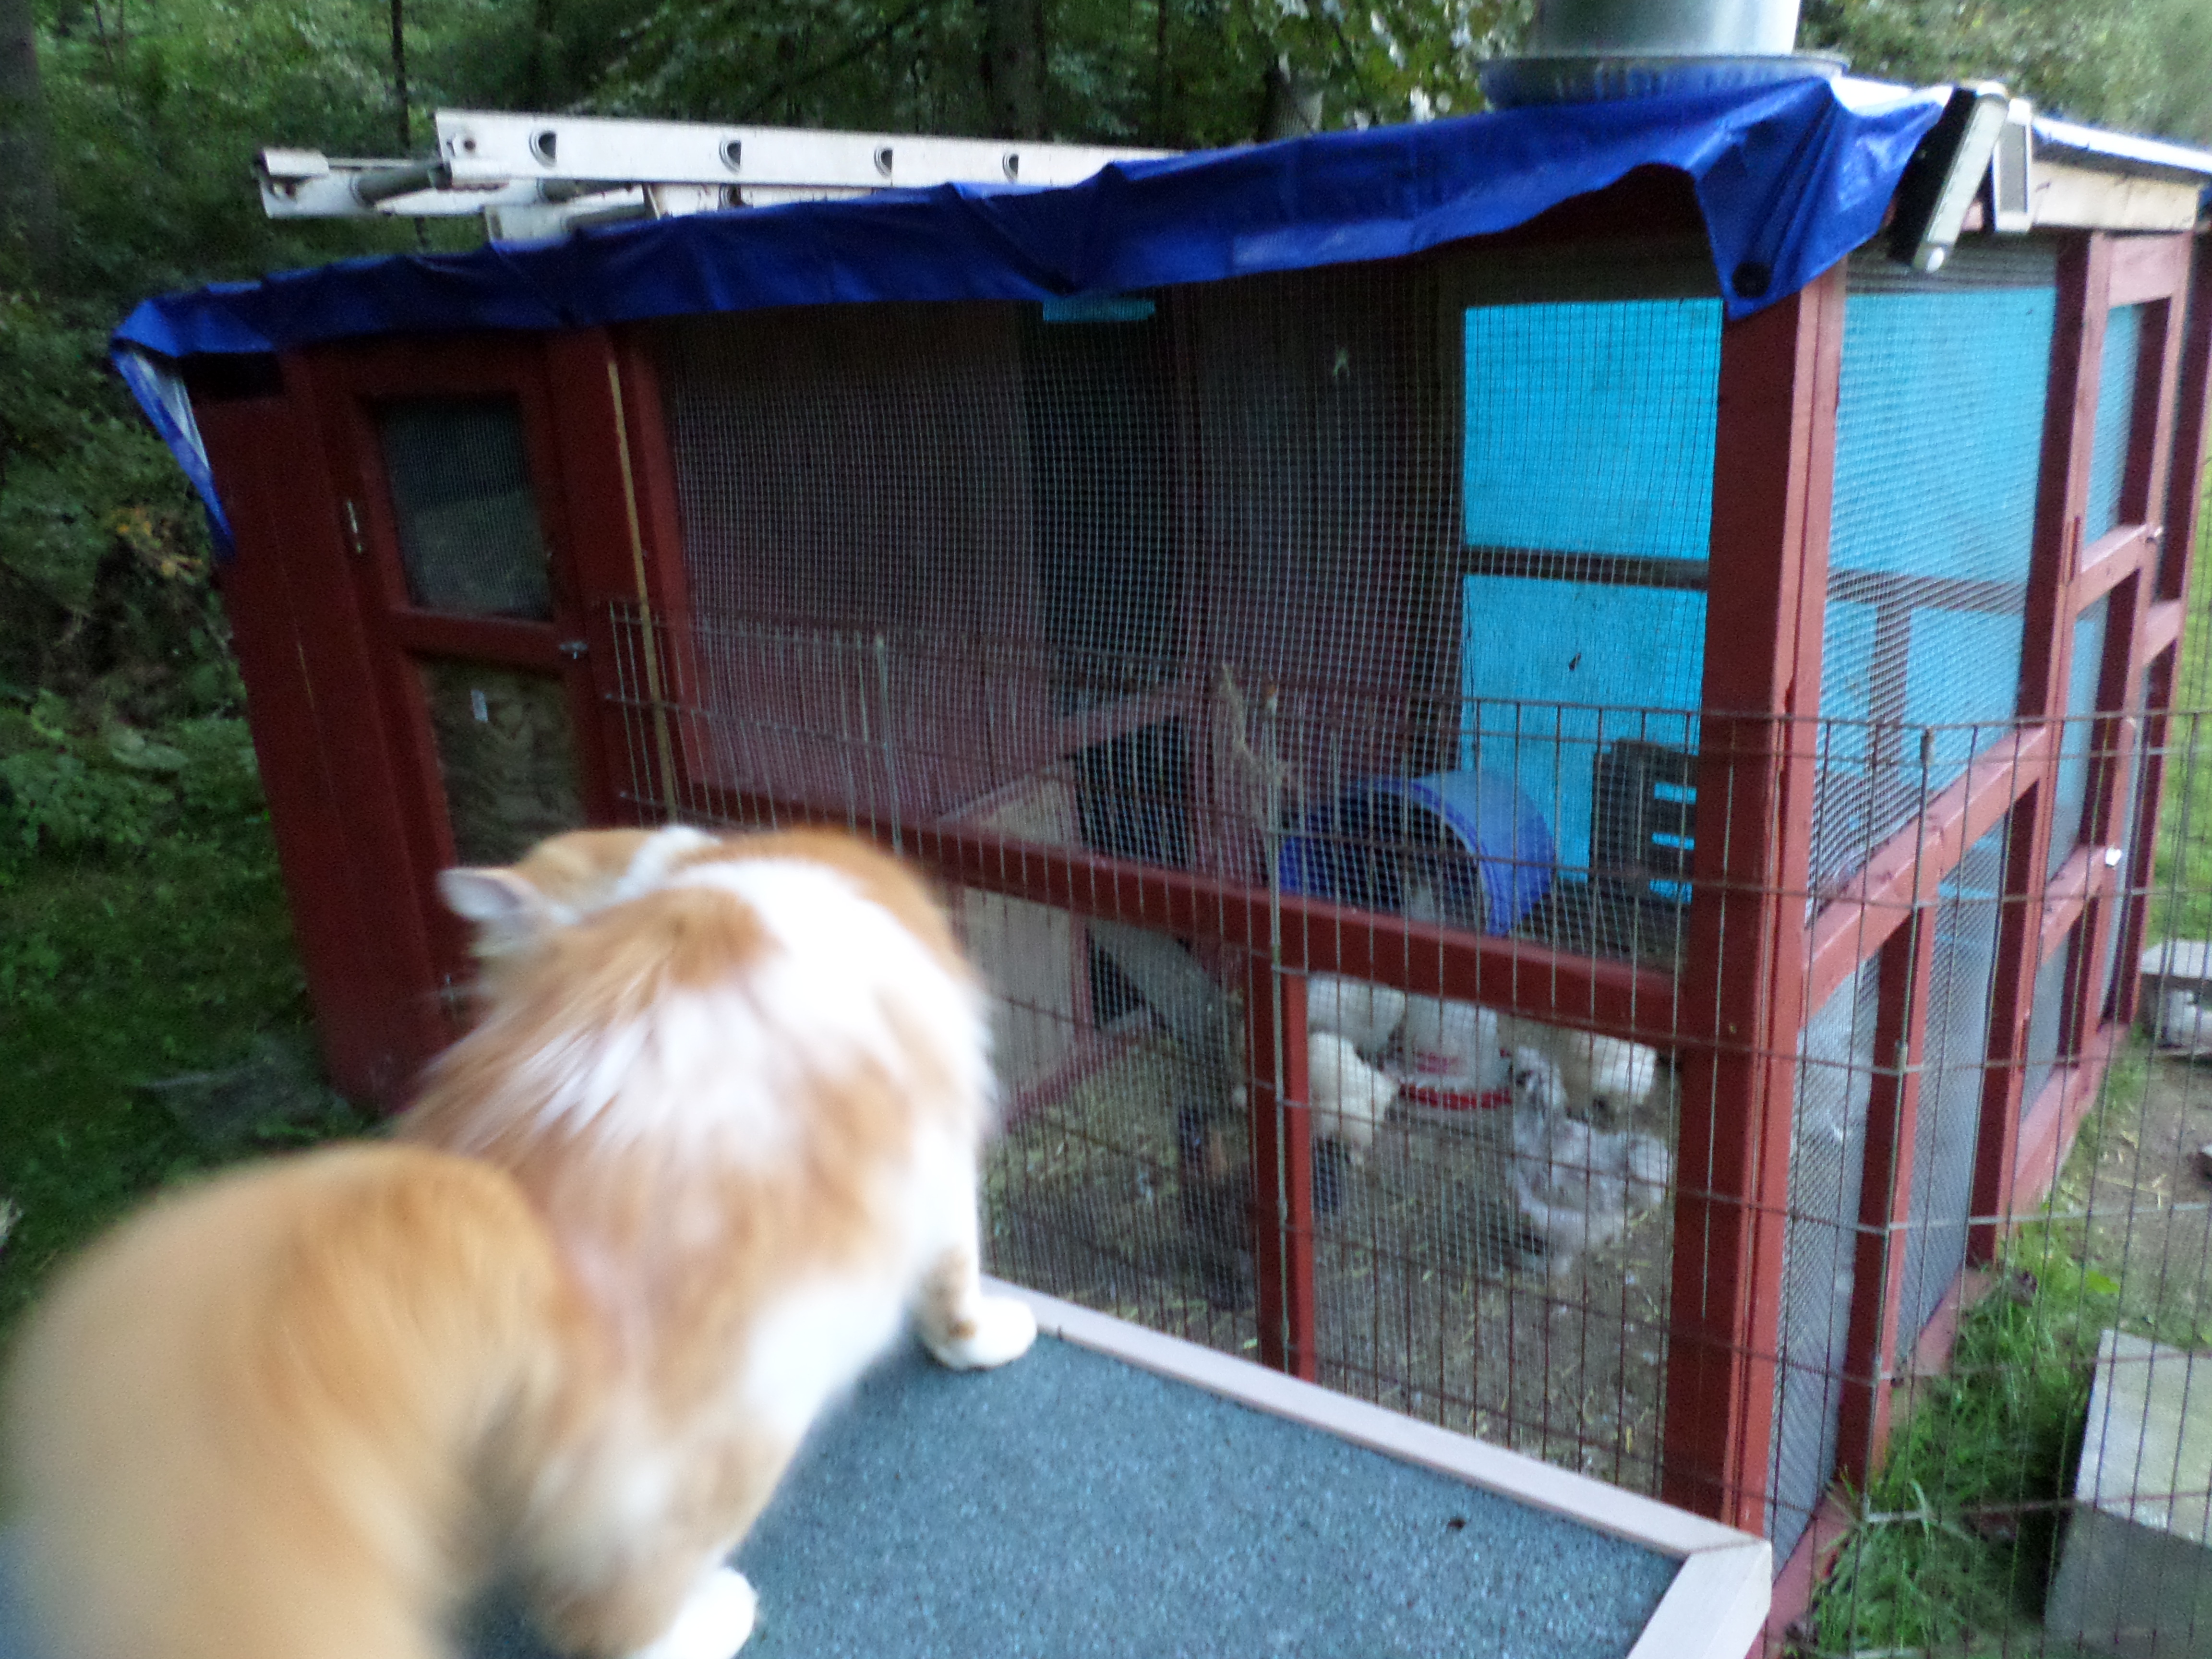 Marshall overseeing the chickens as they start to turn in for the night.